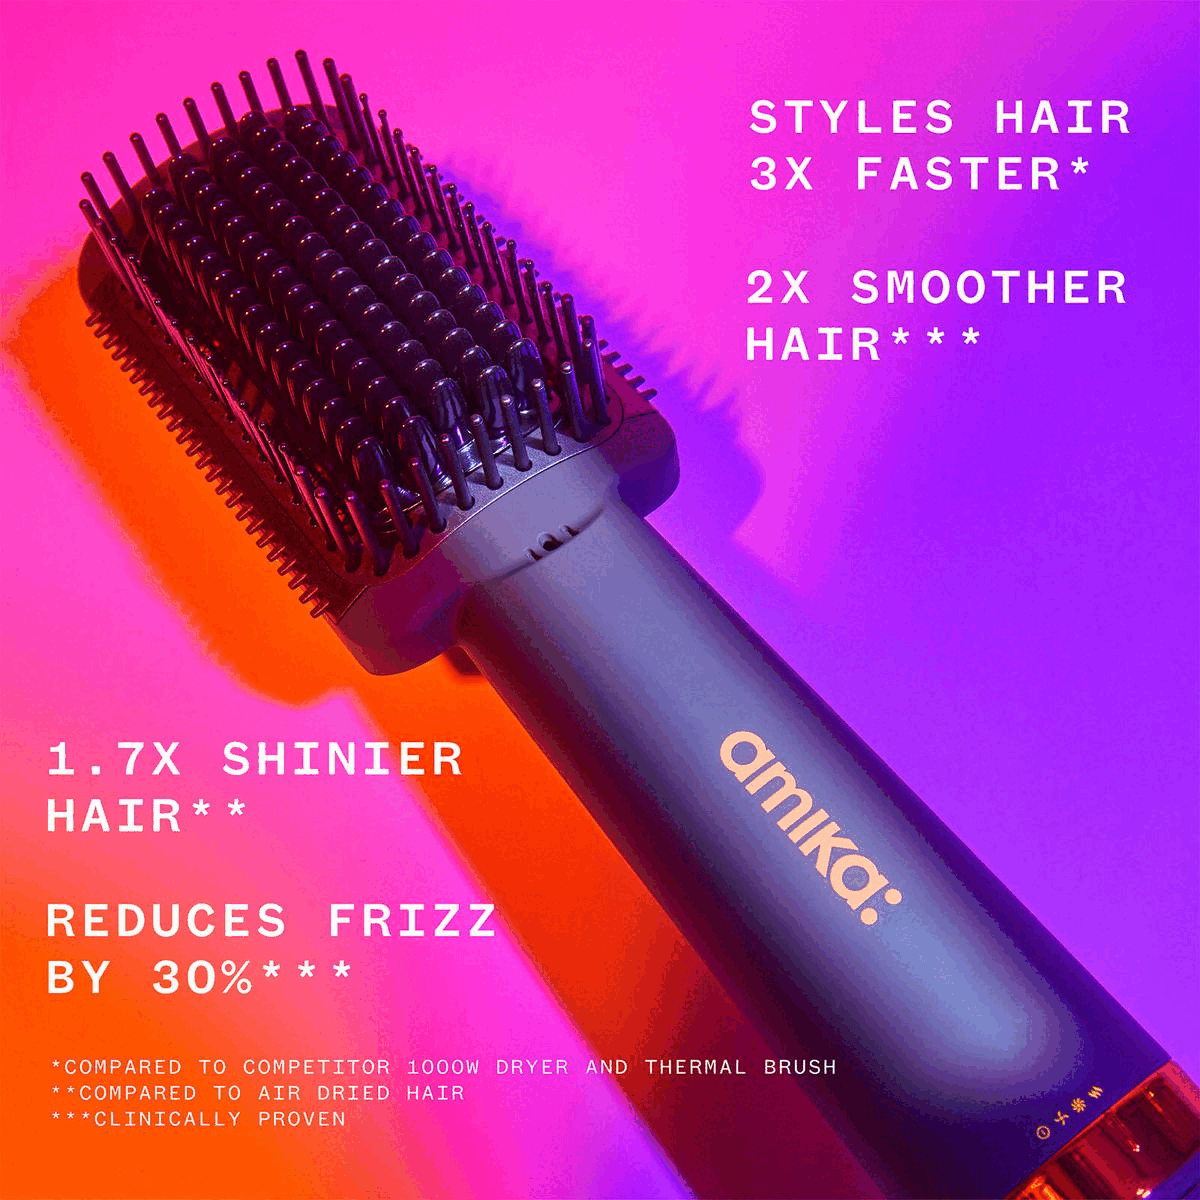 STYLES HAIR 3x FASTER*, 2x SMOOTHER HAIR***, 1.7X SHINIER HAIR**,REDUCES FRIZZ BY 30%***,*COMPARED TO COMPETITOR 10OOW DRYER AND THERMAL BRUSH, **COMPARED TO AIR DRIED HAIR, ***CLINICALLY PROVEN, BEFORE on a mission for a sleek blowout, double agent blow dryer + straightening brush, AFTER mission complete, hair unretouched, FAR - INFRARED HEAT TO LOCK IN MOISTURE, FLEXIBLE OUTER TEETH DELIVER A GOOD GRIP FOR EASY BLOWOUT,NEGATIVE-ION GENERATOR DELIVERS SMOOTH + SHINY RESULTS, 3 HEAT SETTINGS, EXTRA LONG 360° SWIVEL CORD